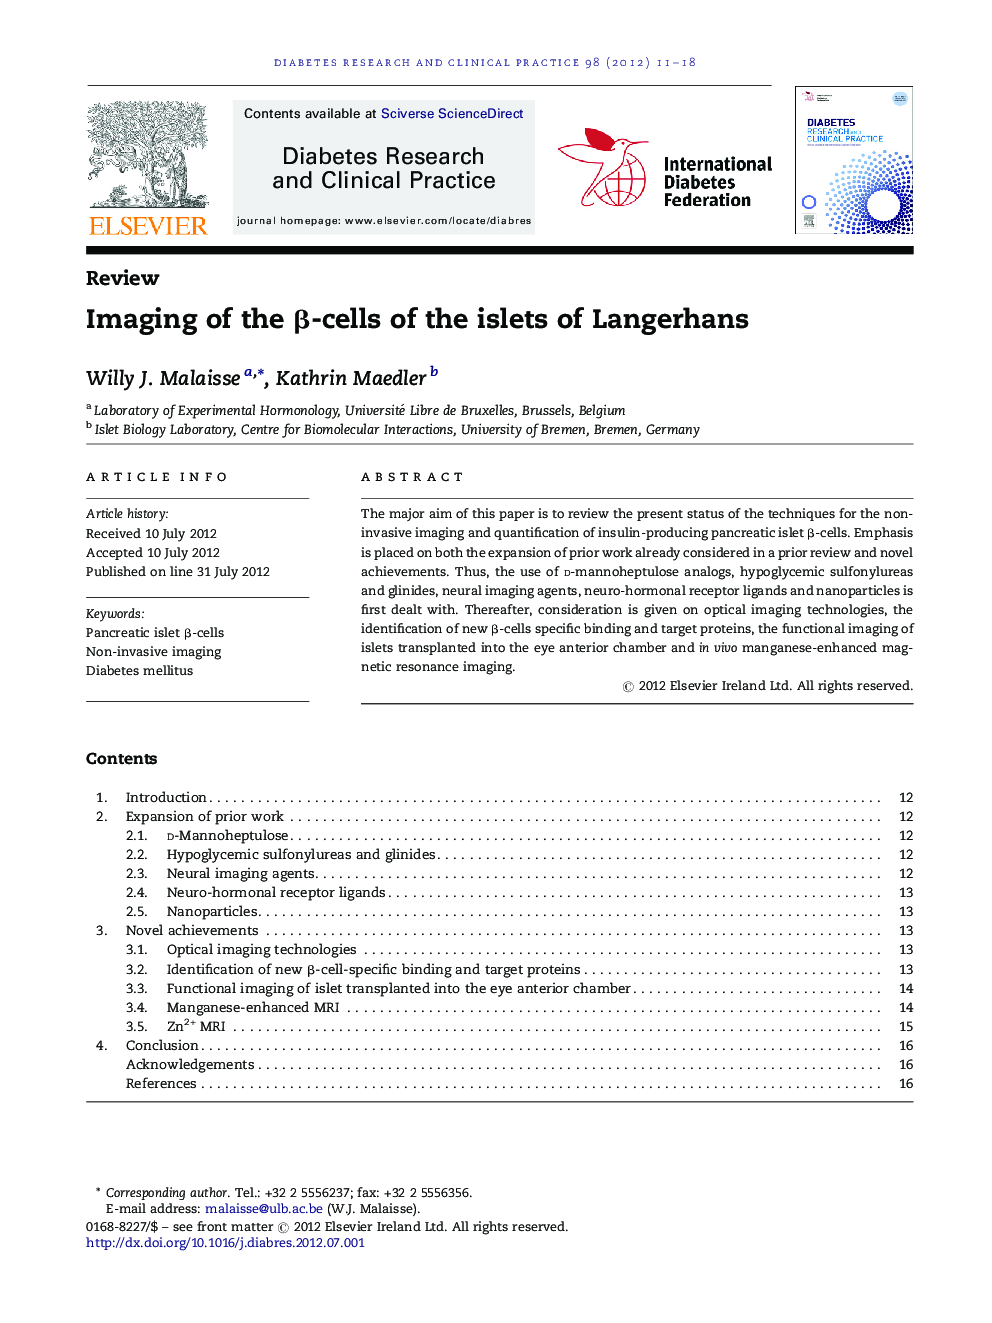 Imaging of the Î²-cells of the islets of Langerhans